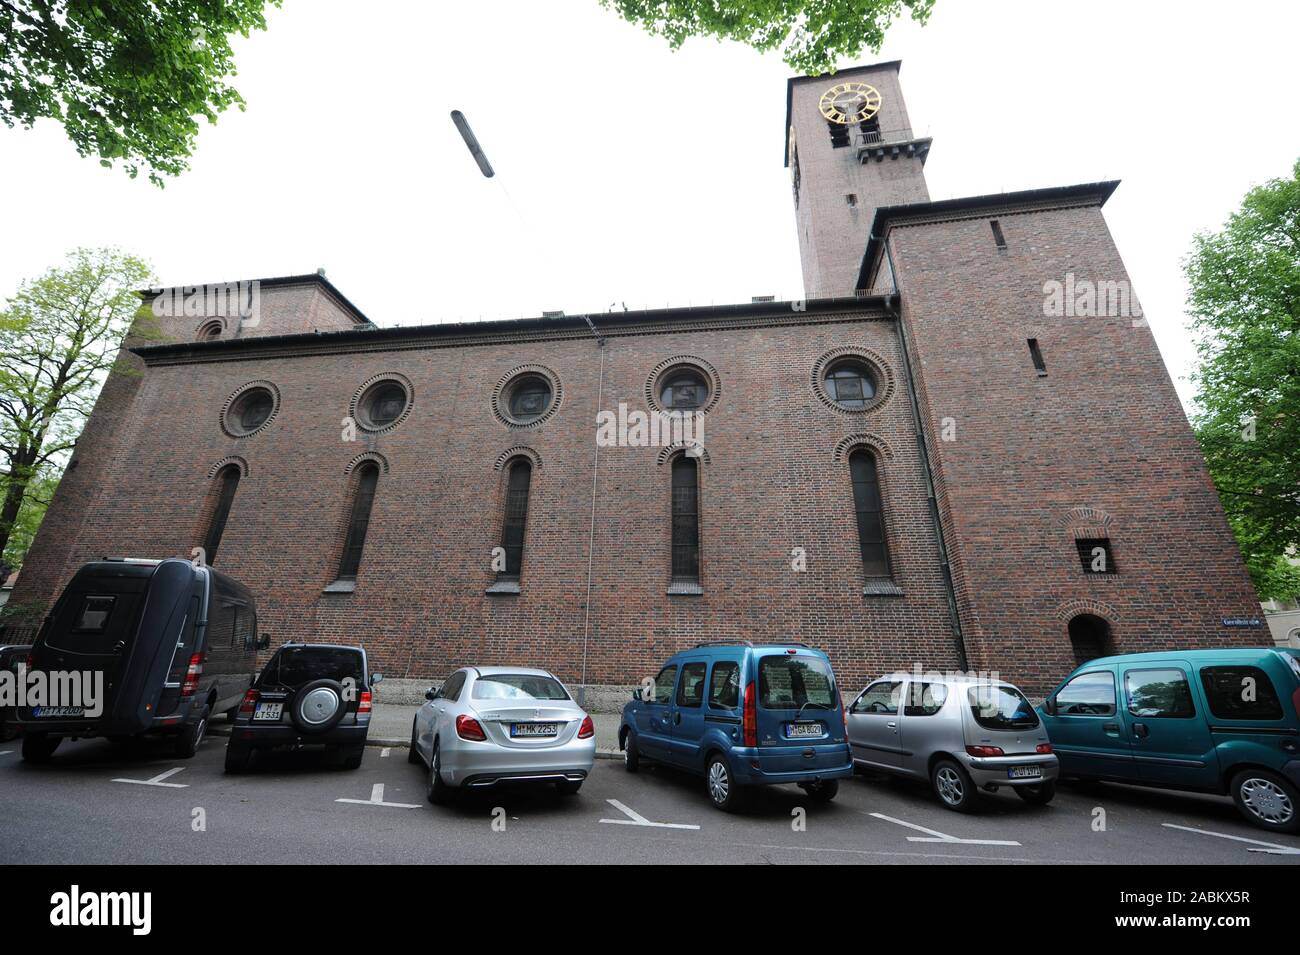 The Church of the Resurrection in Westend on Gollierstrasse. The church is to be opened for new uses. [automated translation] Stock Photo